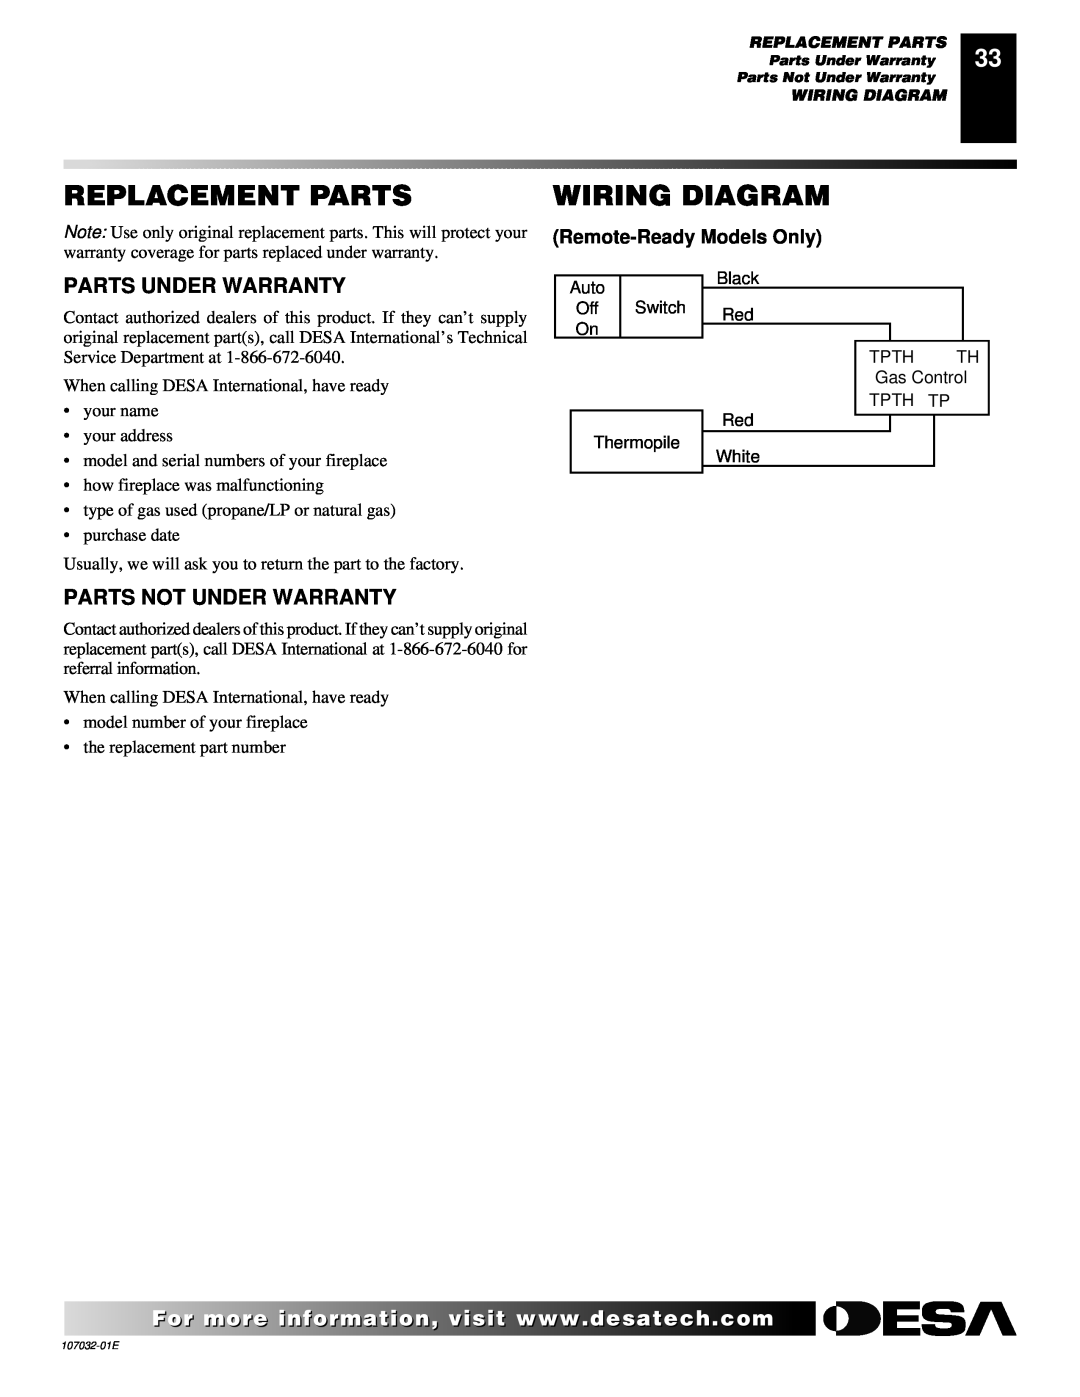 Desa FMH26NR Replacement Parts, Wiring Diagram, Parts Under Warranty, Parts Not Under Warranty, Remote-ReadyModels Only 